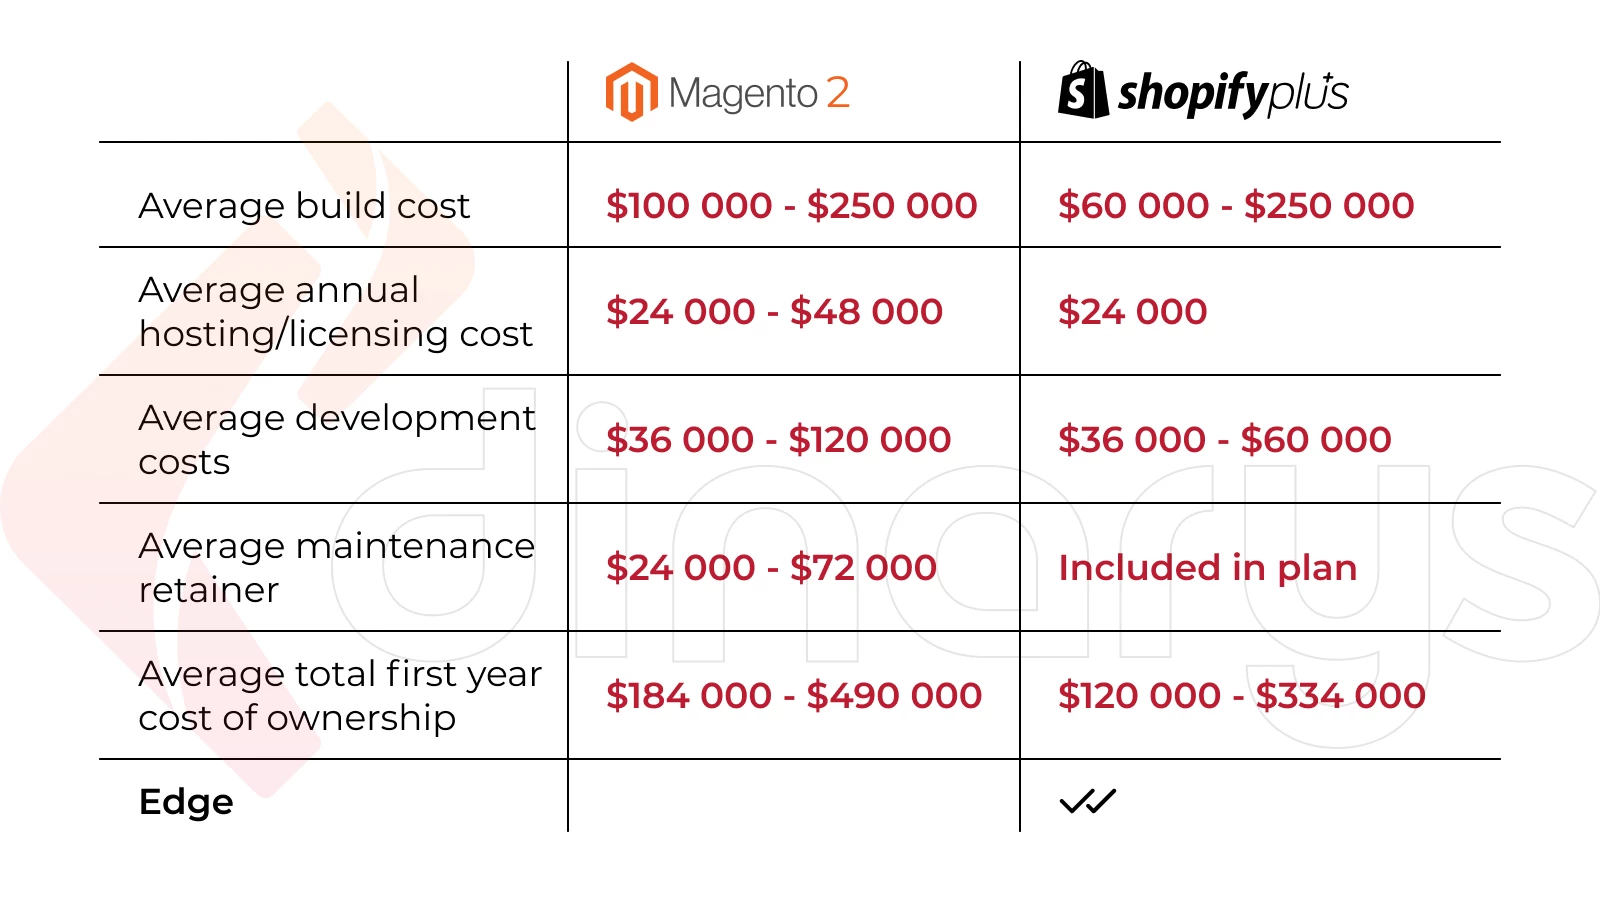 Pricing Differences between Magento and Shopify